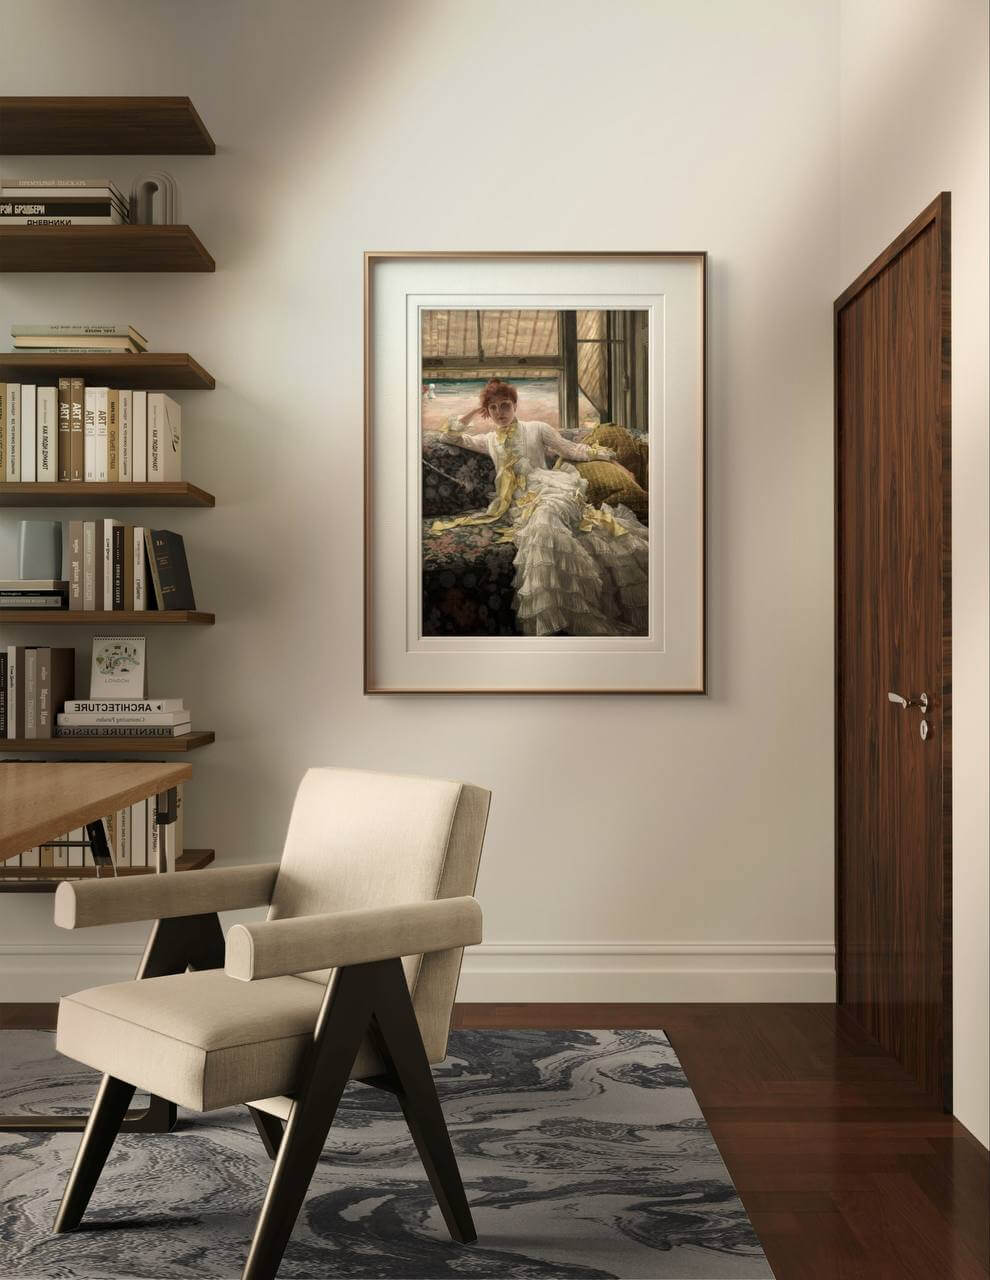 A stylish interior space with a beige chair and an abstract design rug in the foreground. The poster of "Seaside, July" by James Tissot is framed and displayed on the wall, adding a refined touch to the decor. This wall art poster is perfect for home decor, enhancing the elegance of any room with its historical charm.